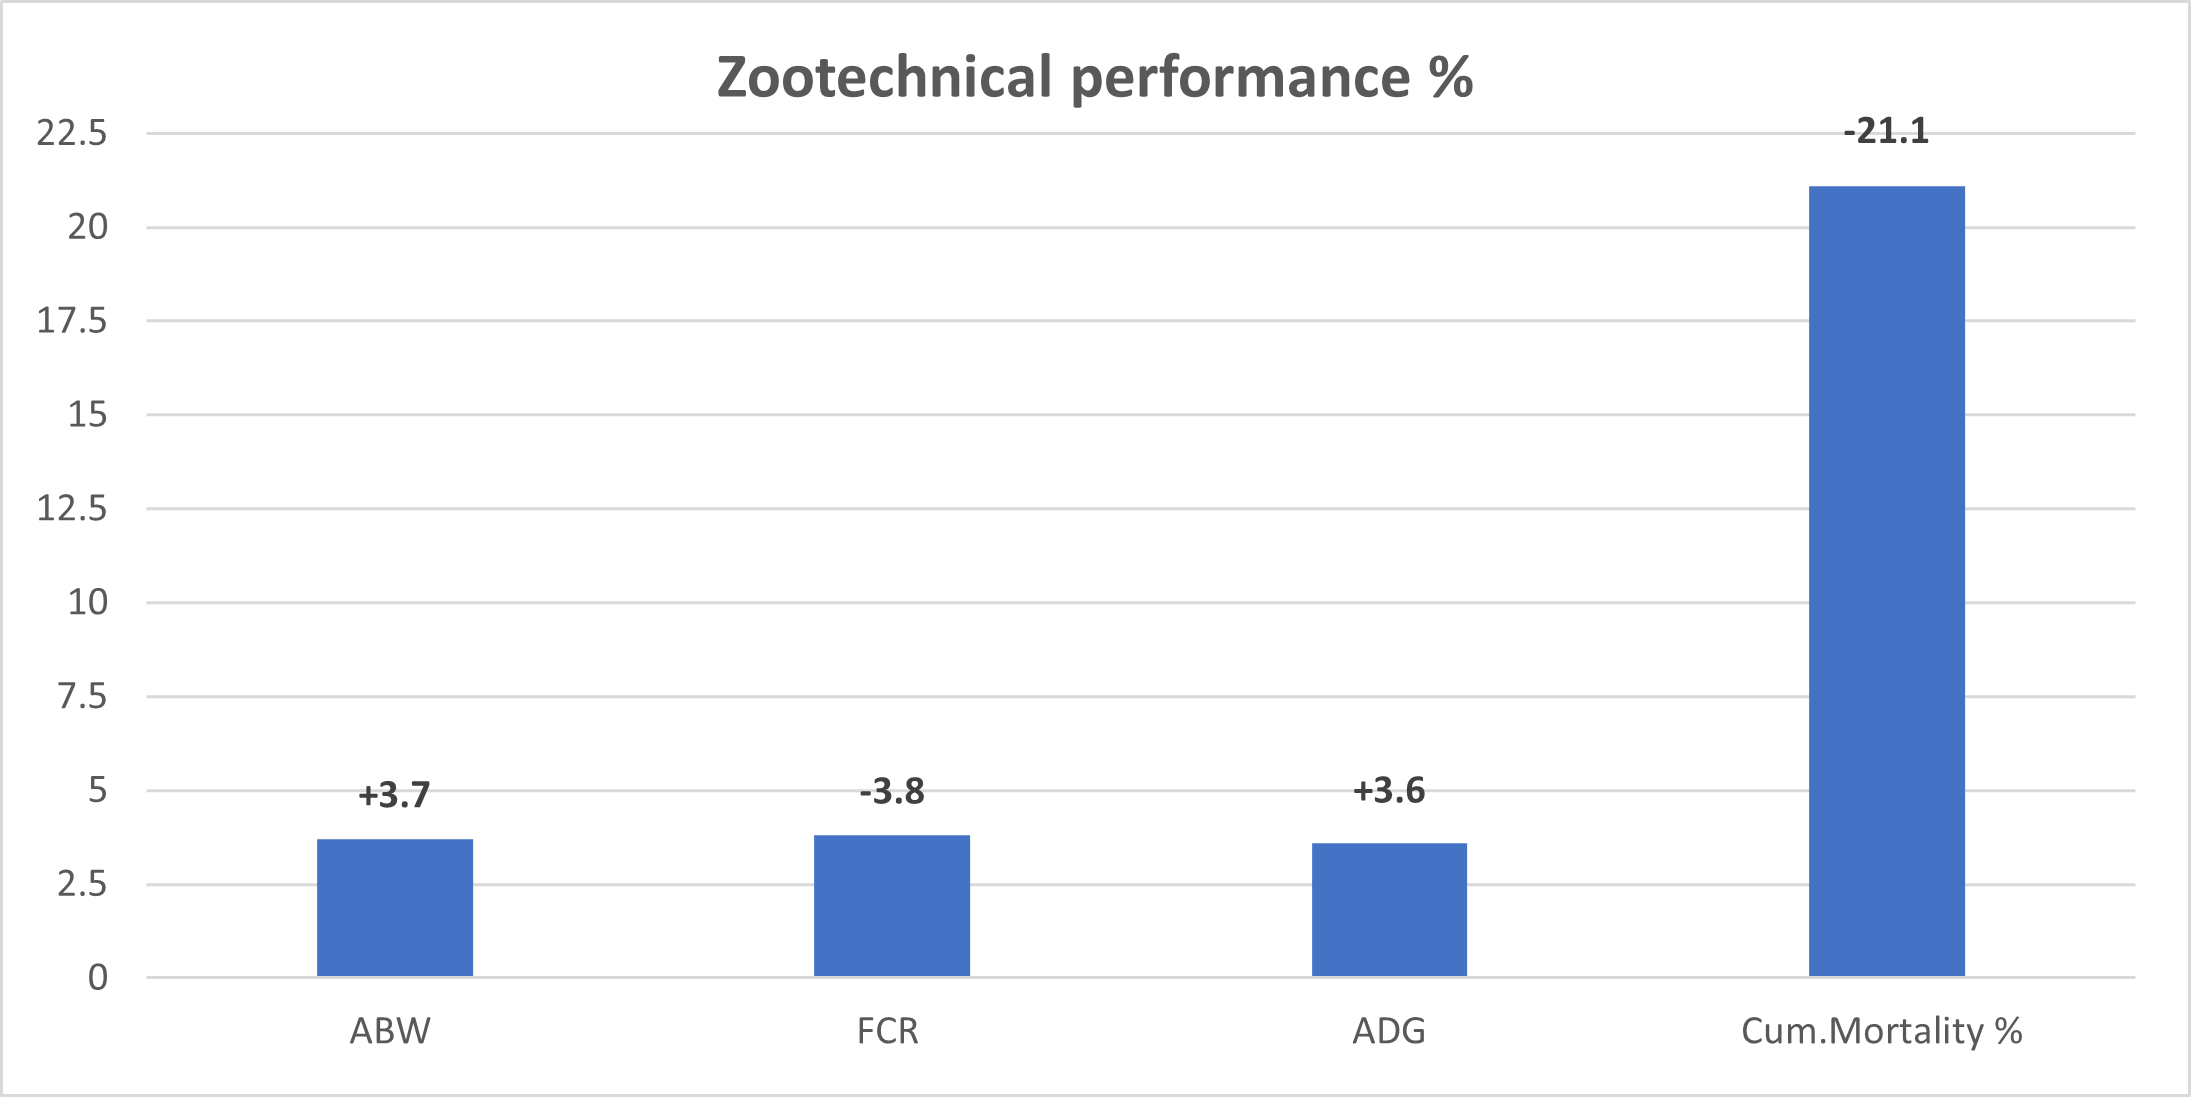 Improvement in zootechnical performance with Selko pH over other products